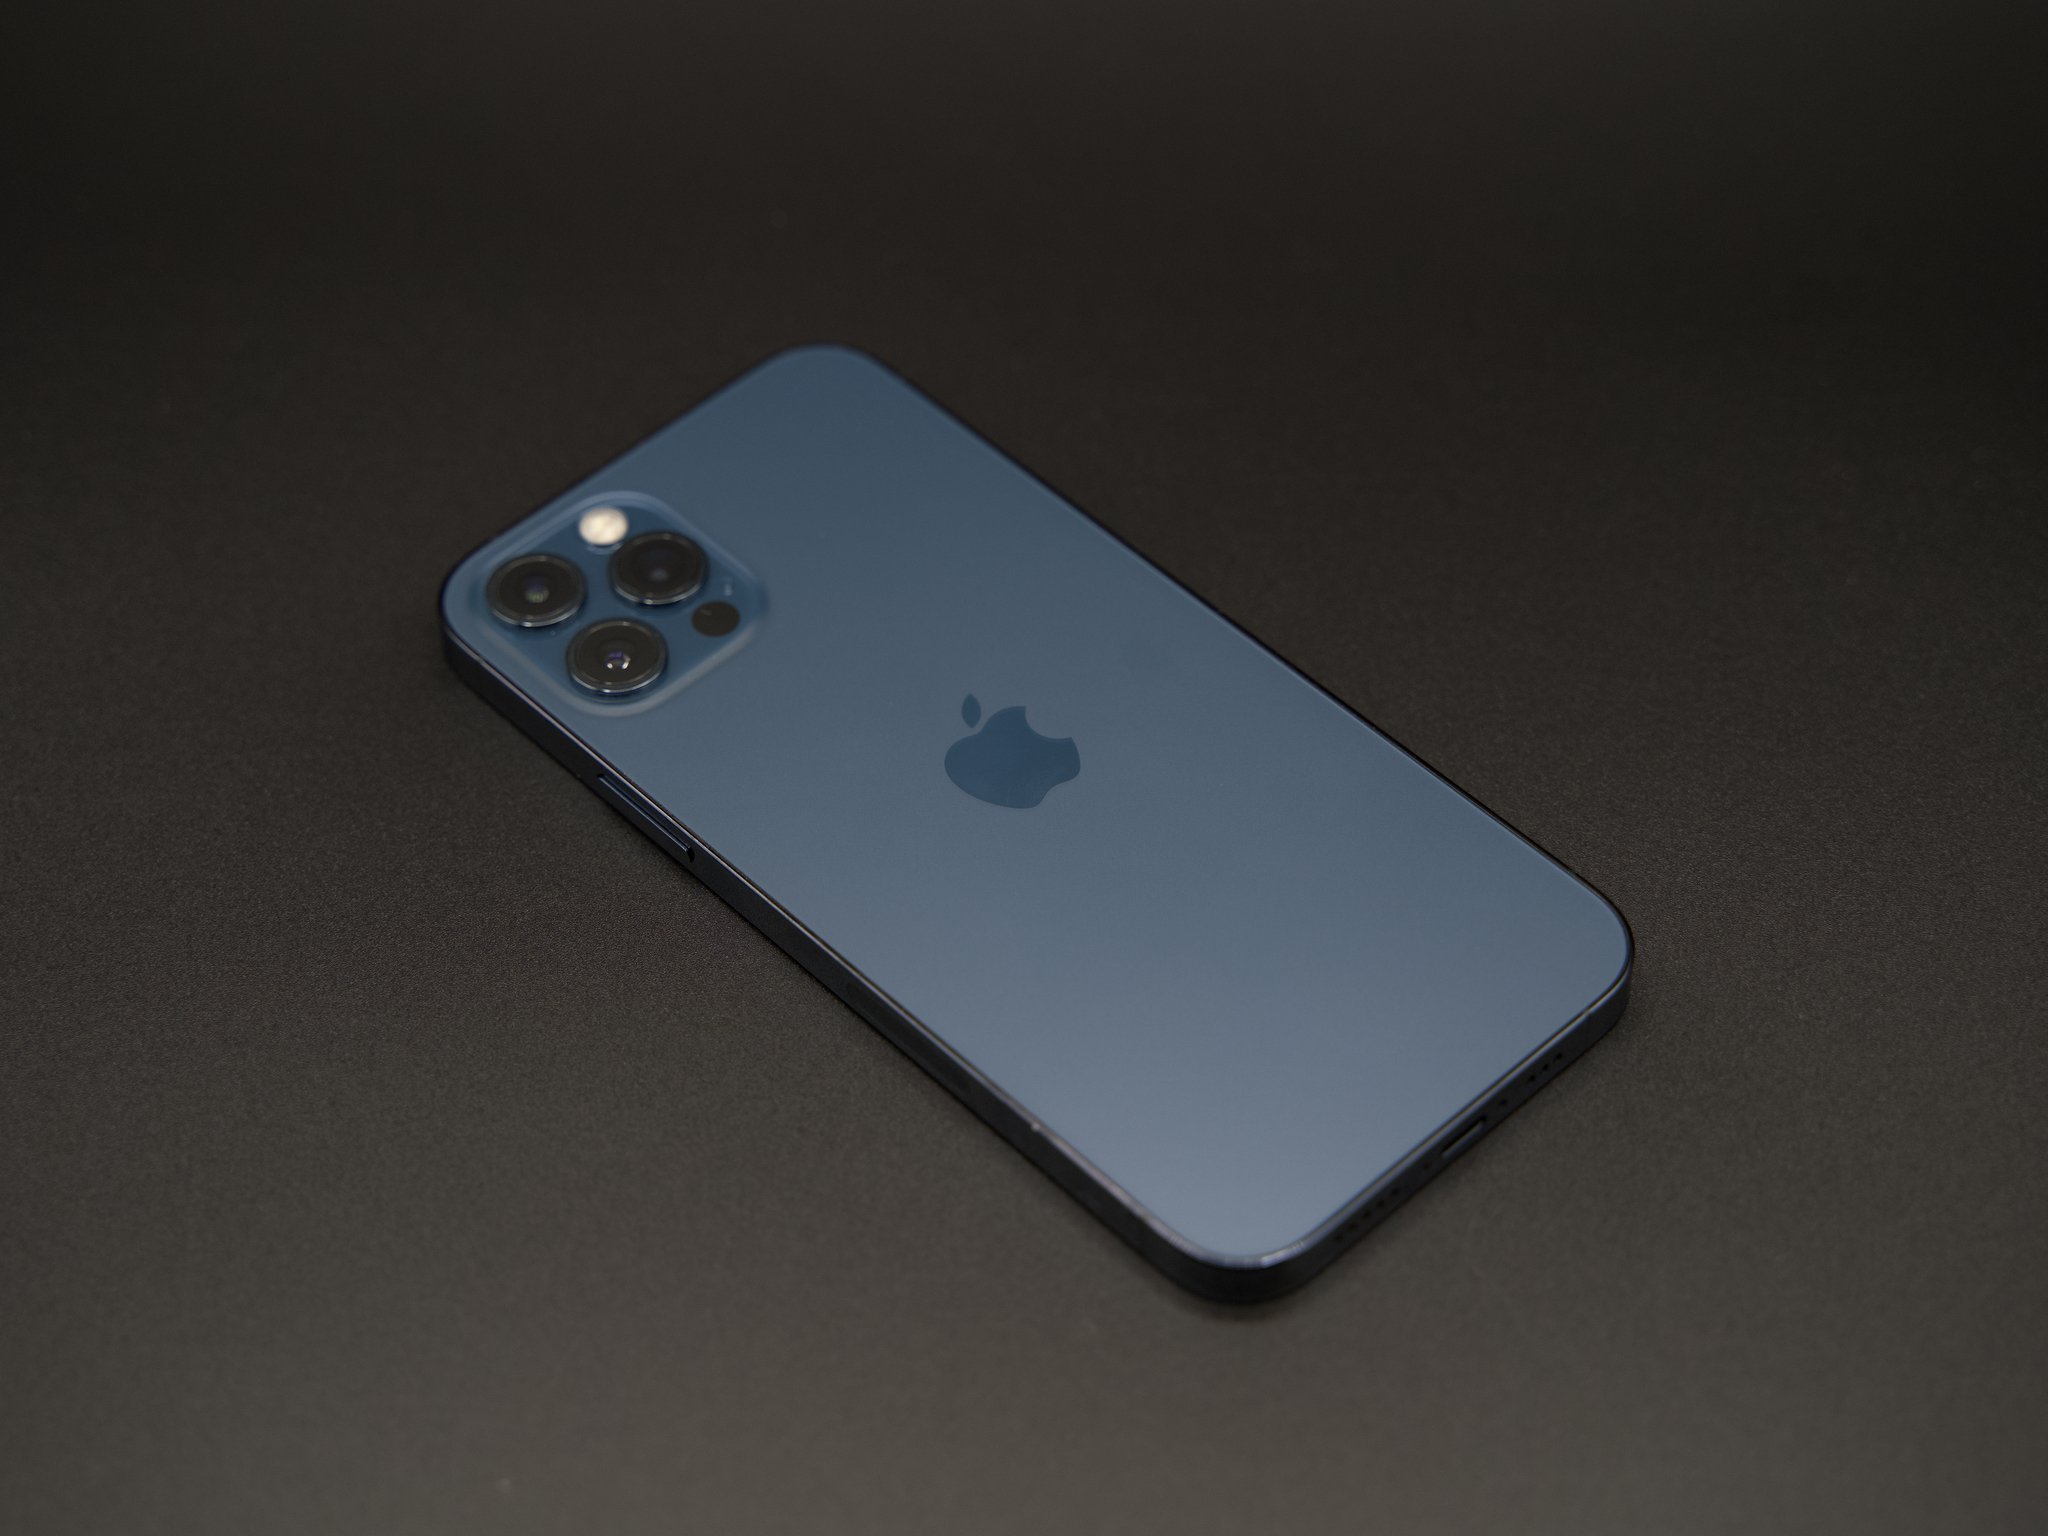 Iphone 12 Pro In Pacific Blue Seems To Be The Most Popular Iphone Imore